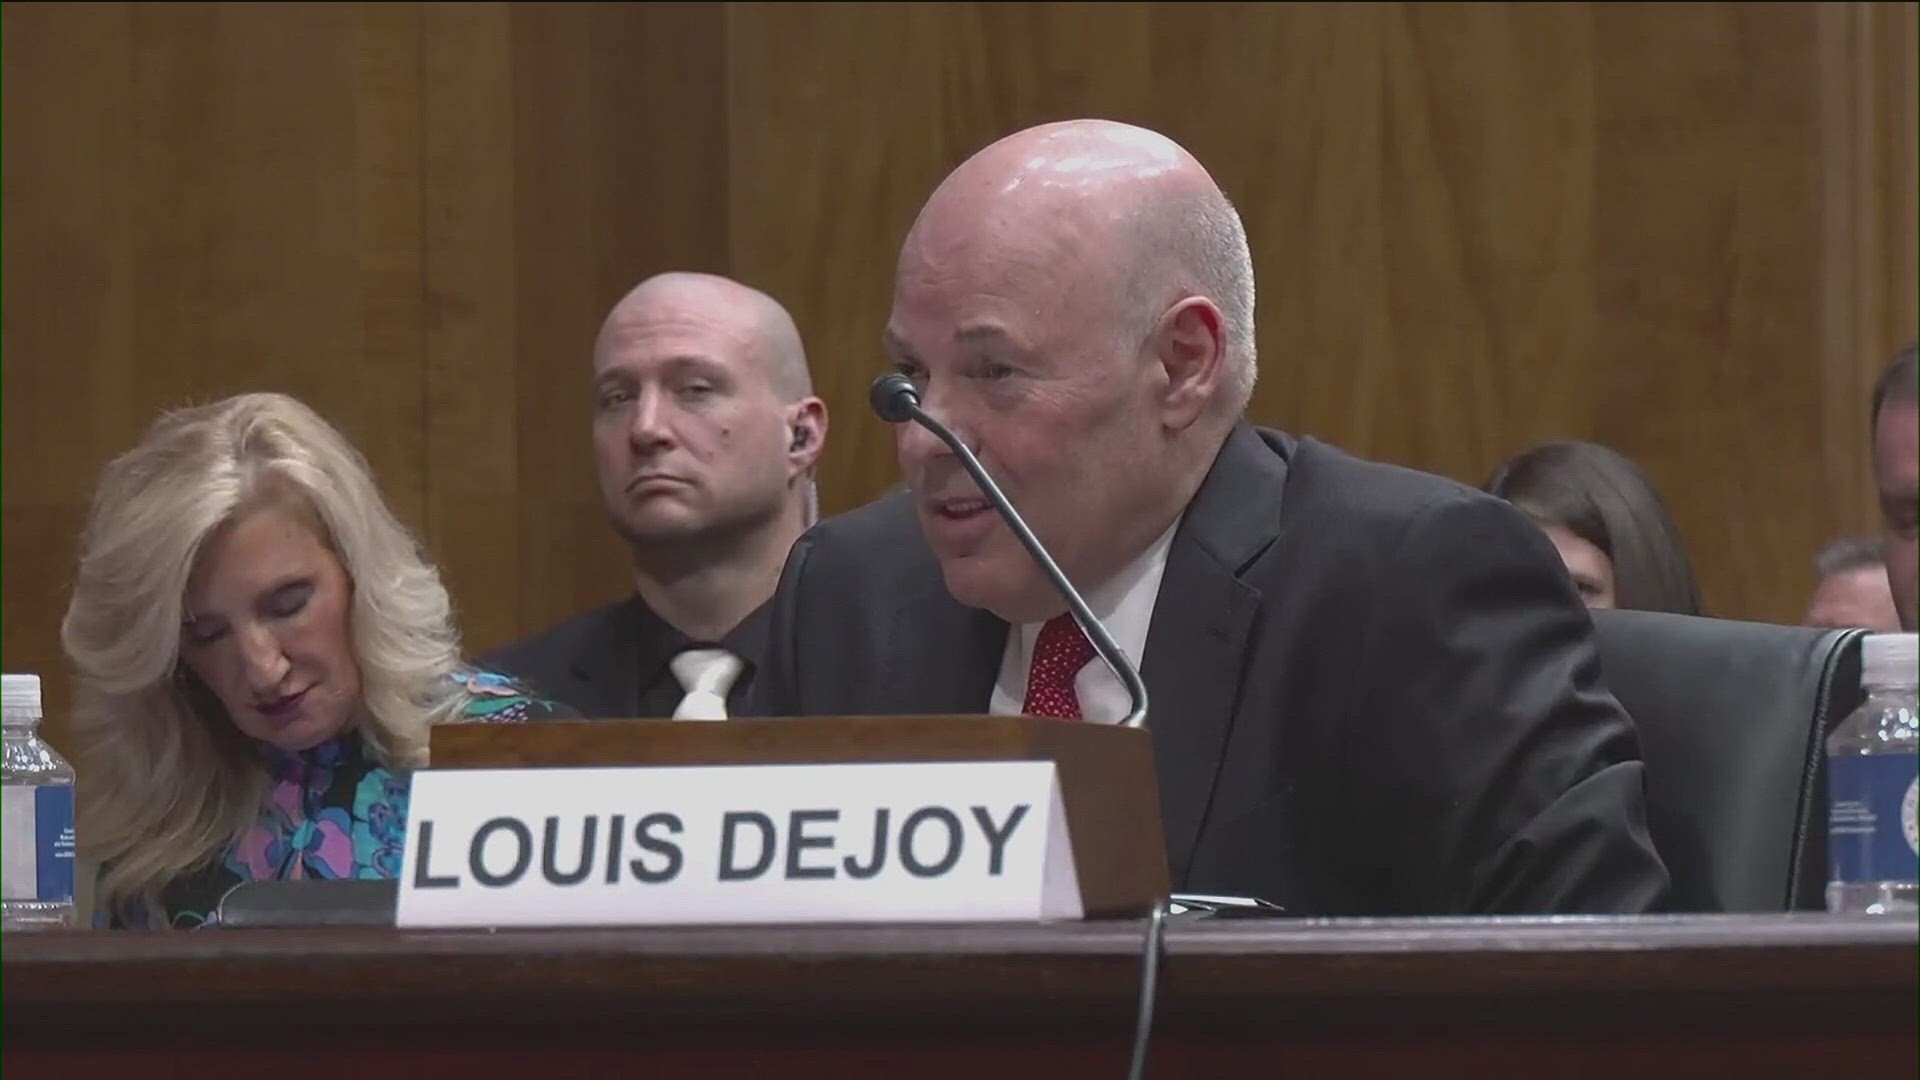 Amid the frustration over mail delays, it's put the postmaster general -- Louis DeJoy -- in the hot seat in the nation's capital.